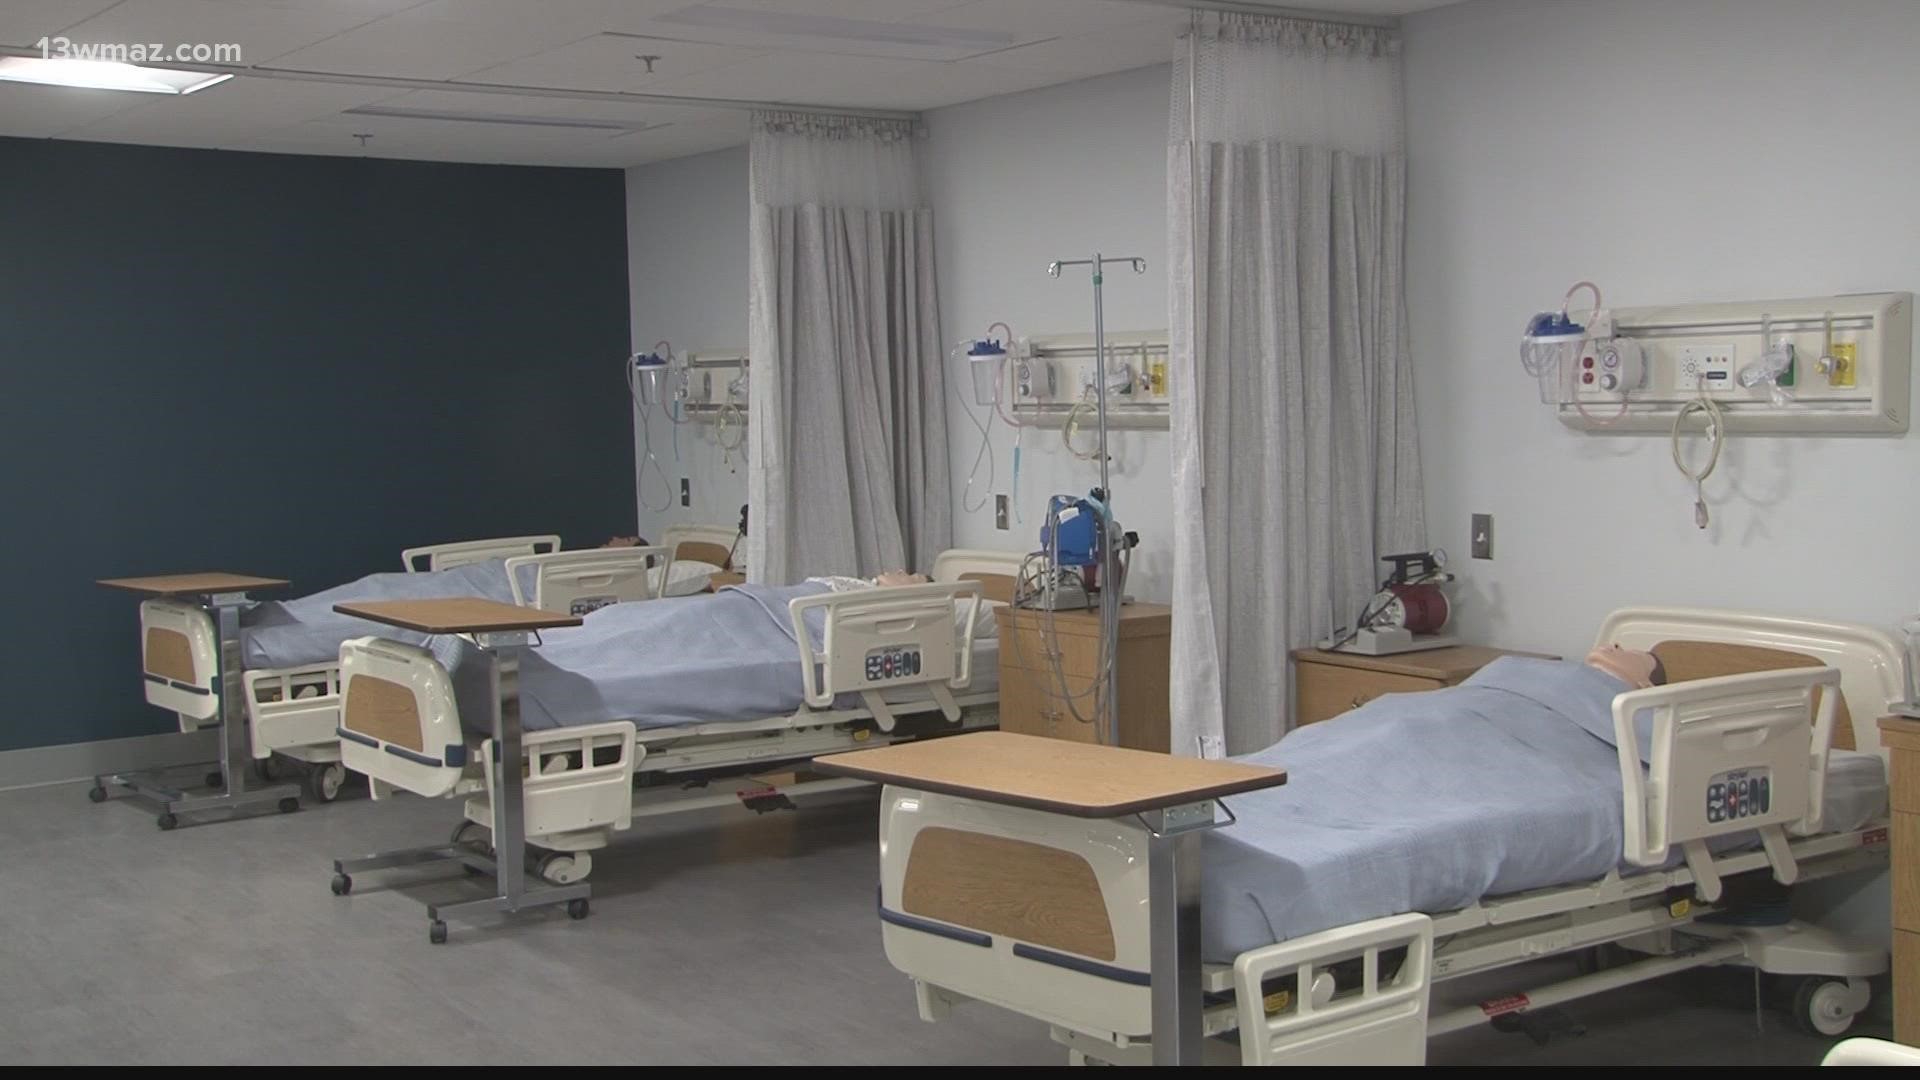 If you want to be a nurse and live in and around Dublin, you're in luck! Middle Georgia State has a brand new nursing facility that opened Friday in the Emerald City